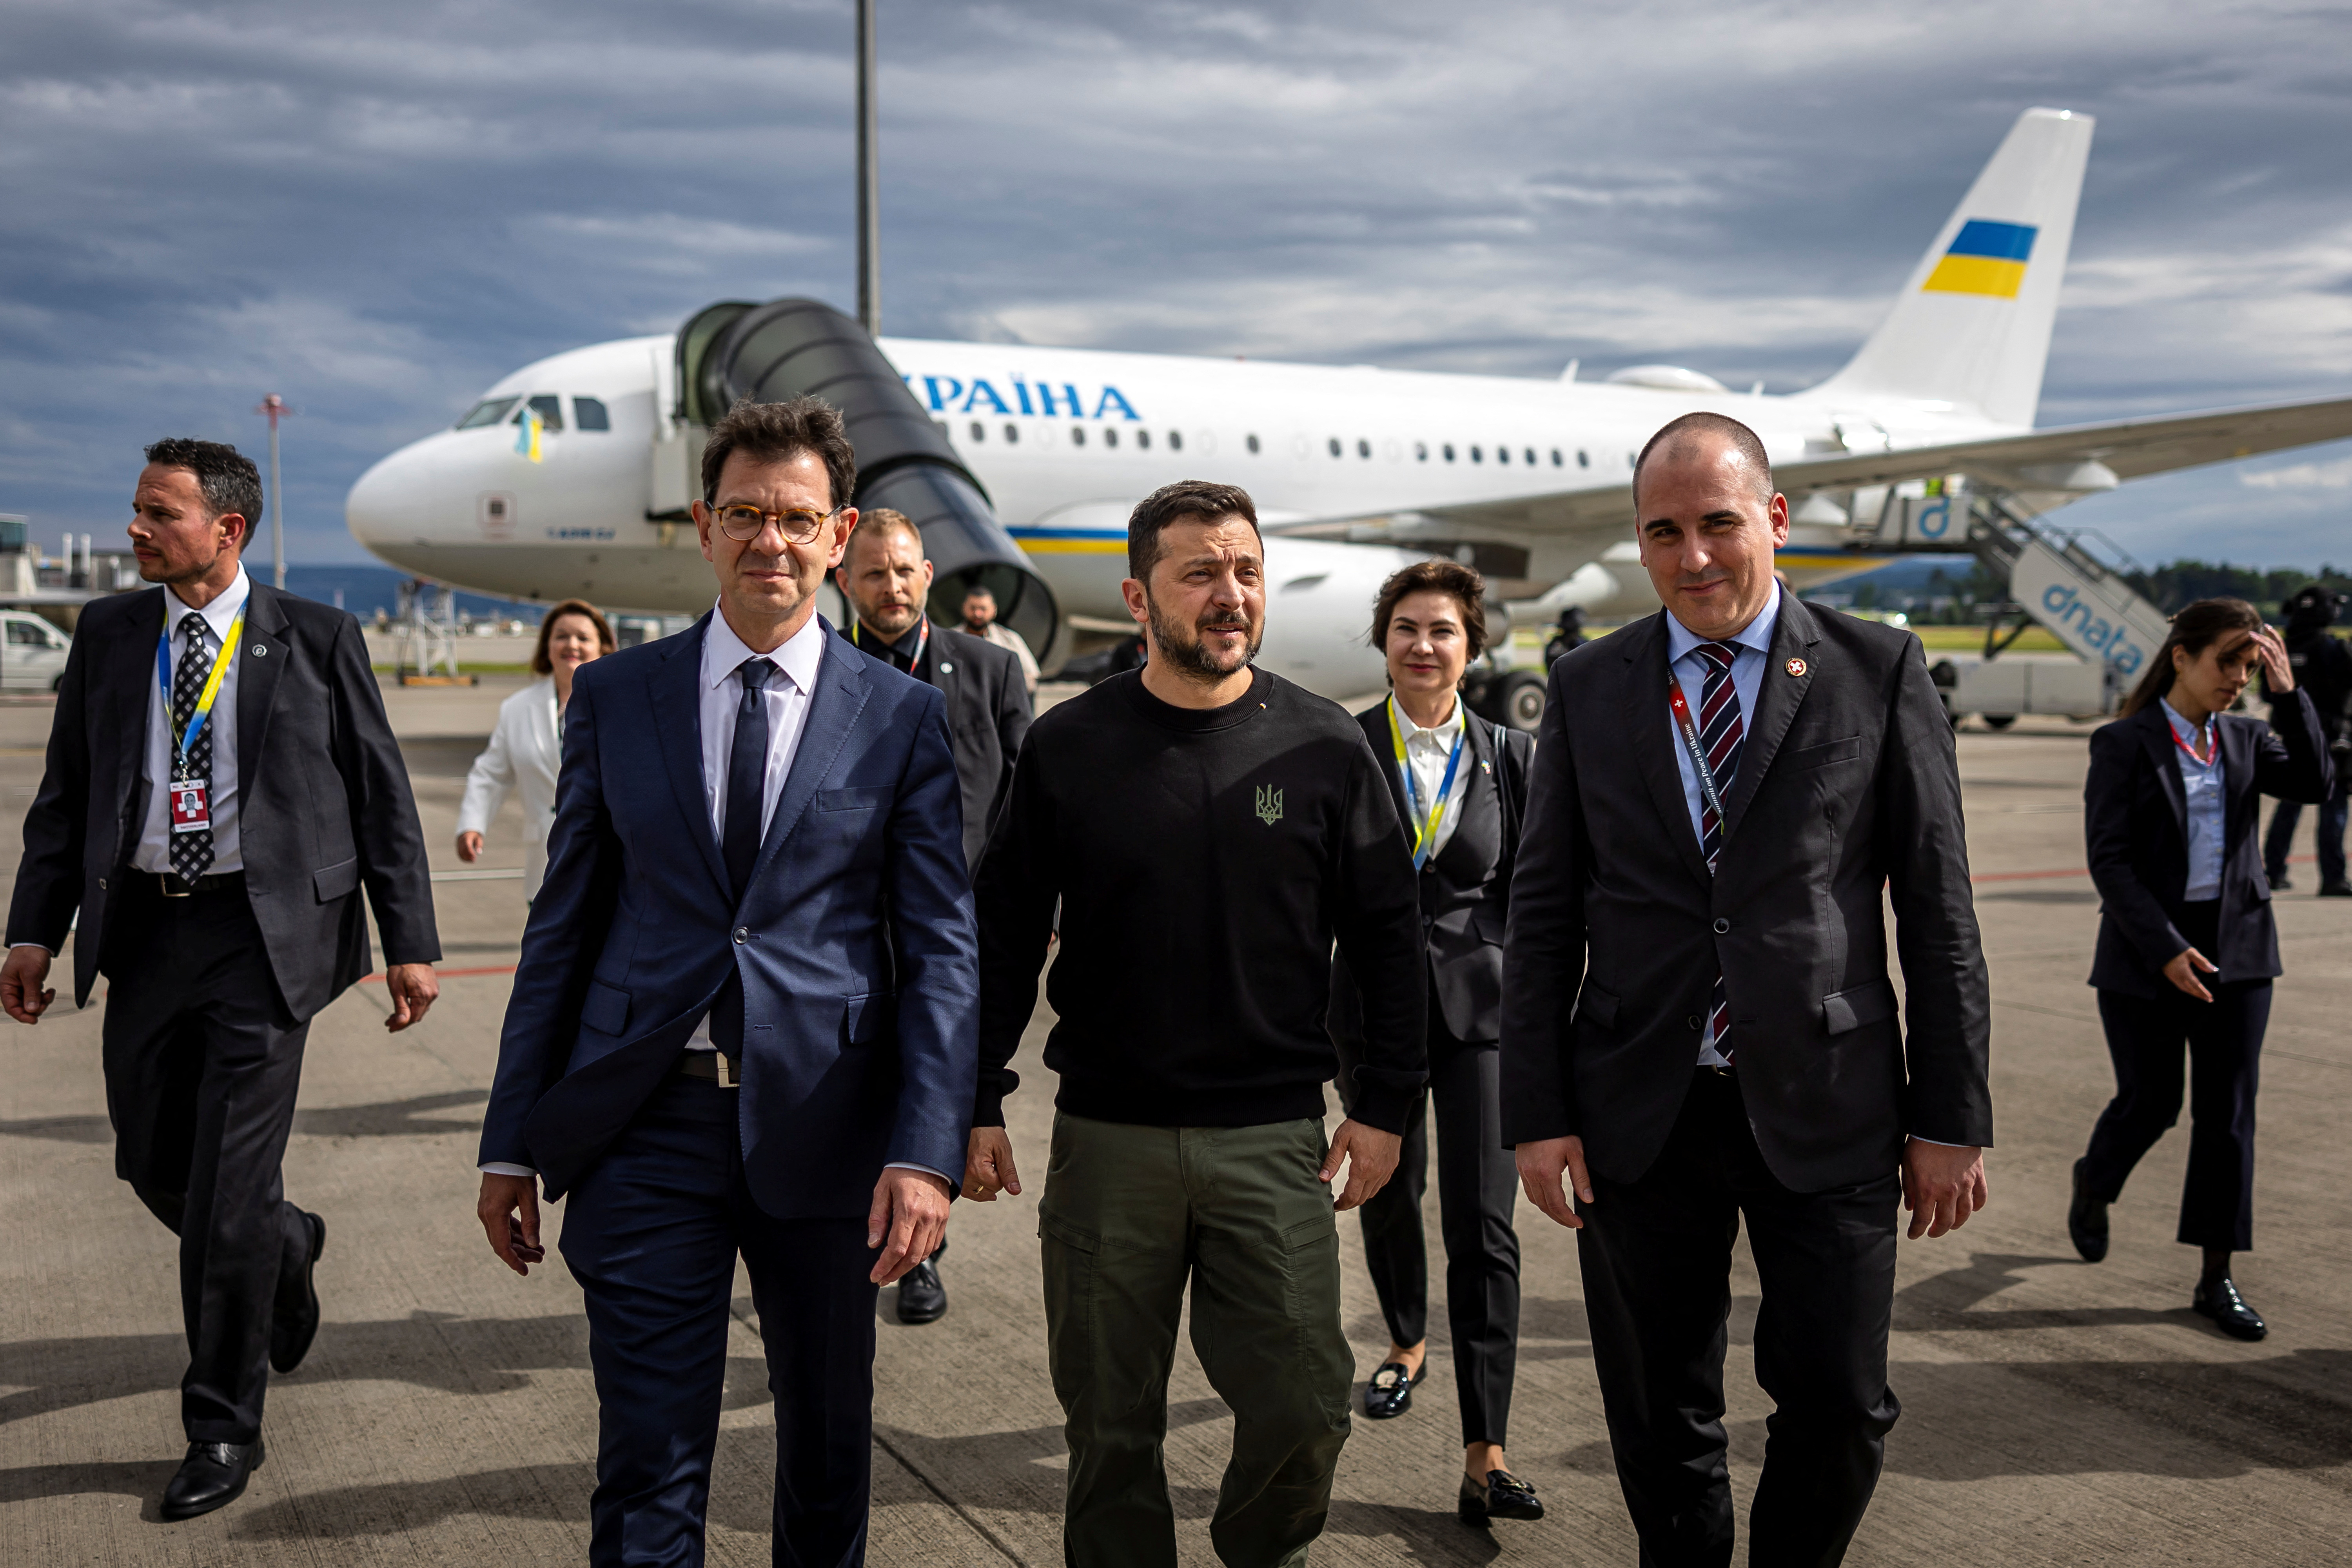 Ukrainian President Volodymyr Zelenskiy arrives at Zurich airport, ahead of the Summit on Peace in Ukraine conference